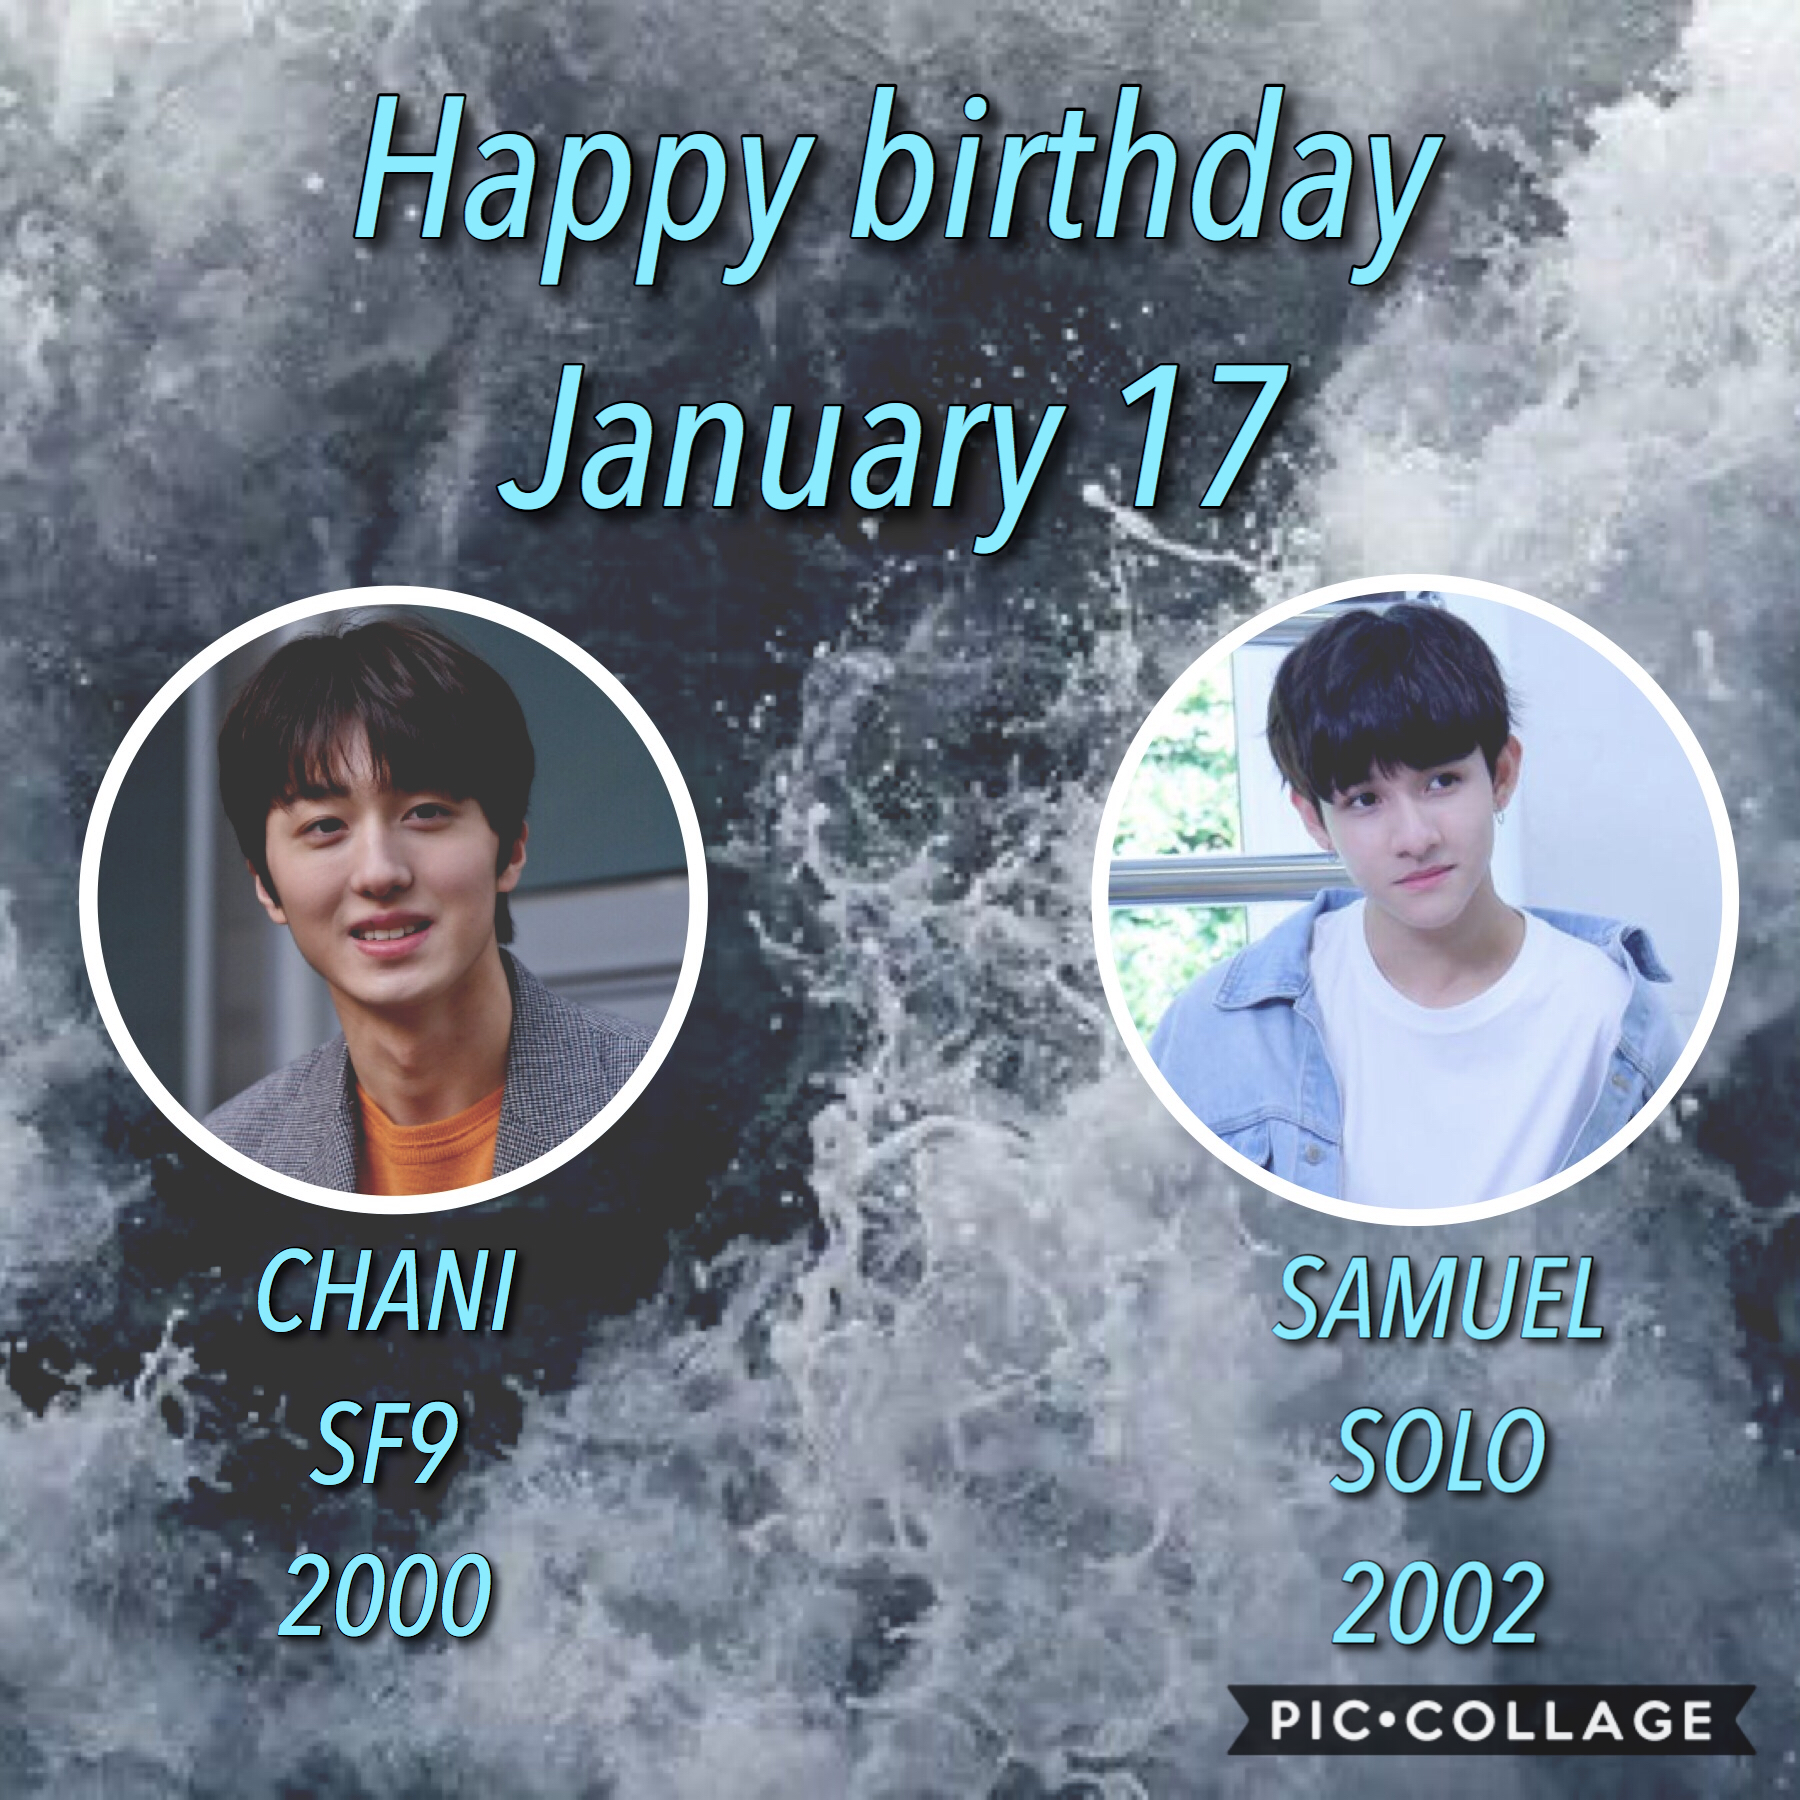 •🎈❄️•
I can’t believe that Chani is now 20 and Samuel is 18!!!🥺🥺
Other birthdays:
•MOMOLAND’s Daisy~ Jan 22
•ONF’s Wyatt~ Jan 23
•PENTAGON’s Yuto~ Jan 23
•B.A.P’s Youngjae
☃️❄️~Whoop~❄️☃️